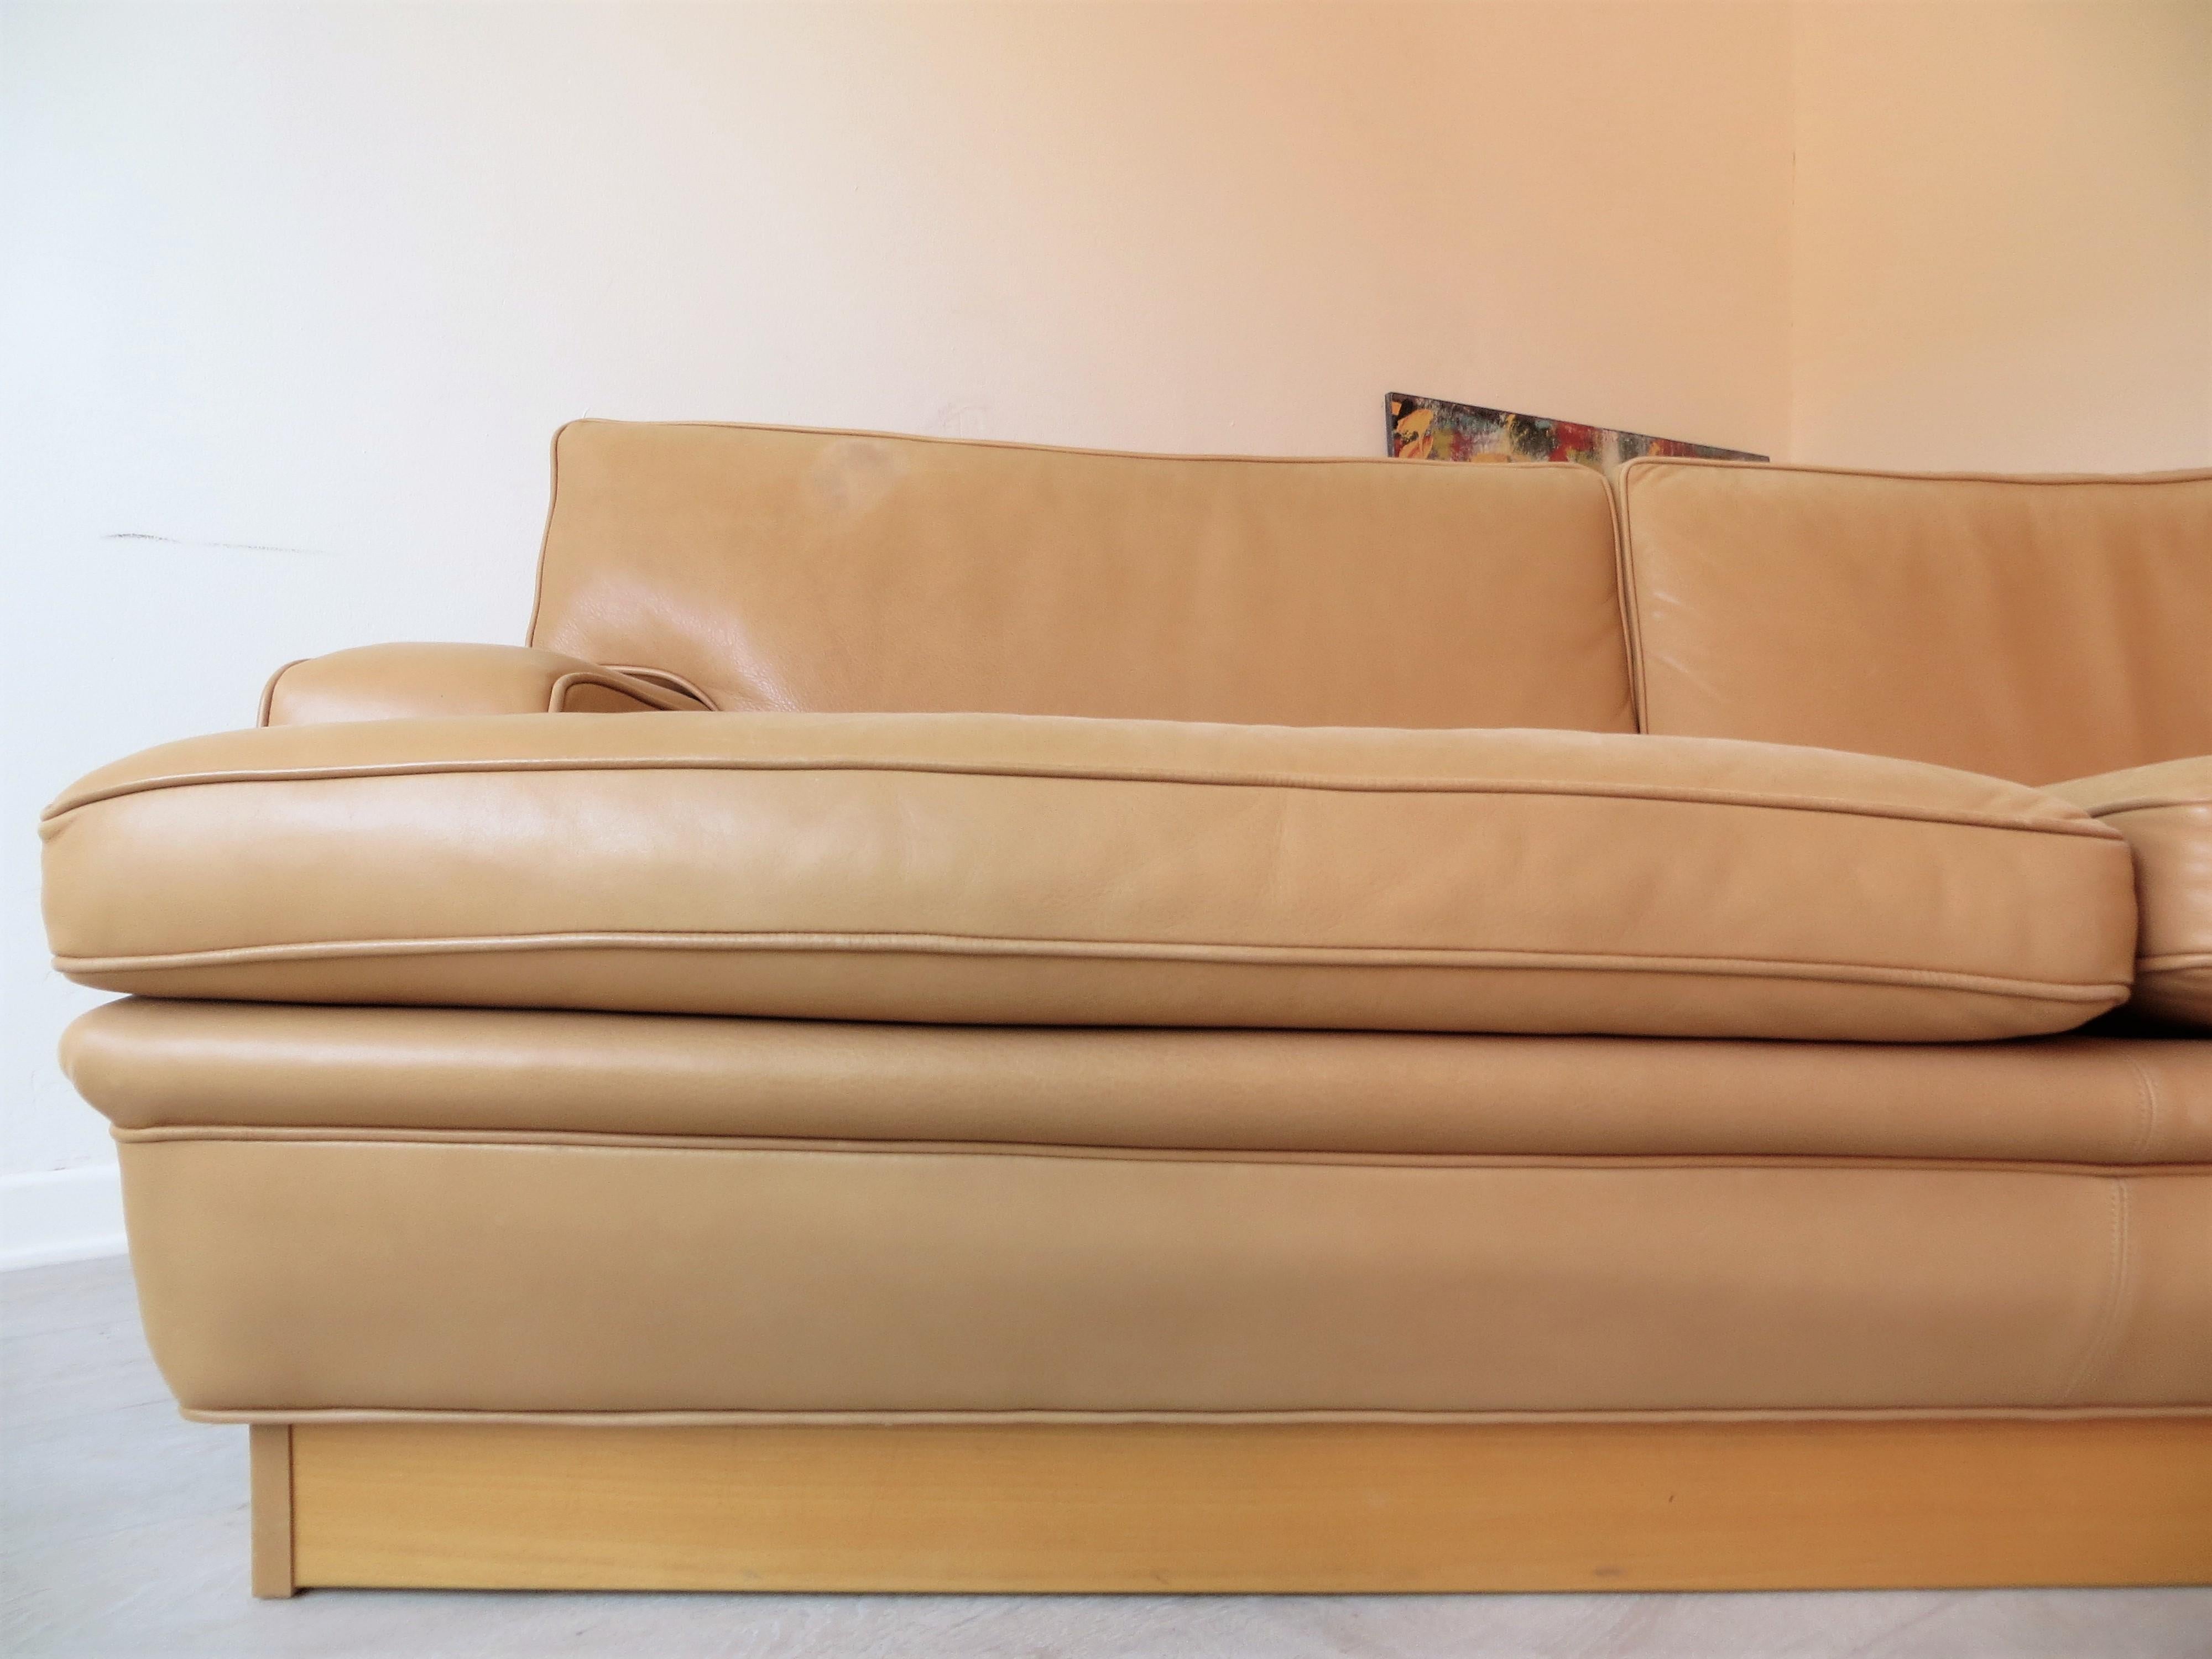 Arne Norell Vintage Leather Merkur Sofa Loveseat in Butterscotch Brown , 1960s For Sale 1